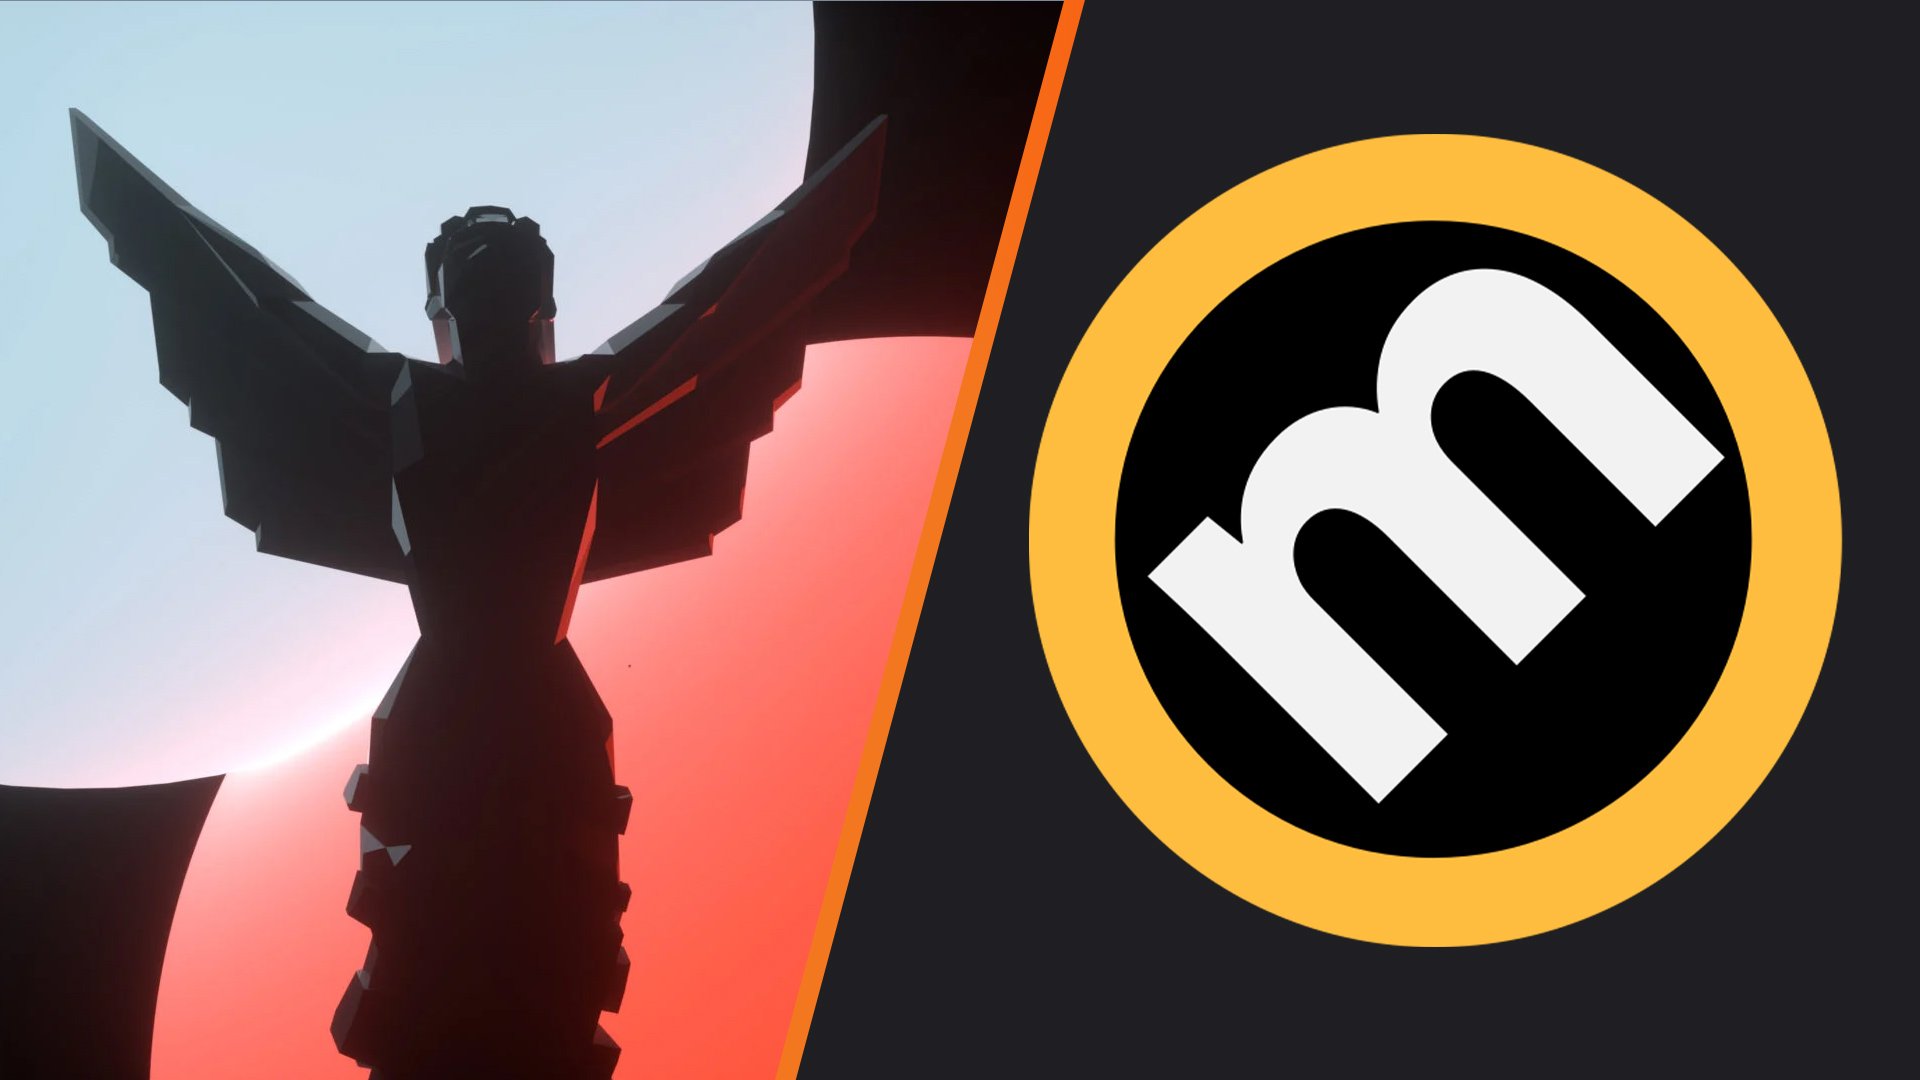 Metacritic - The Game Awards: Game of the Year Nominees